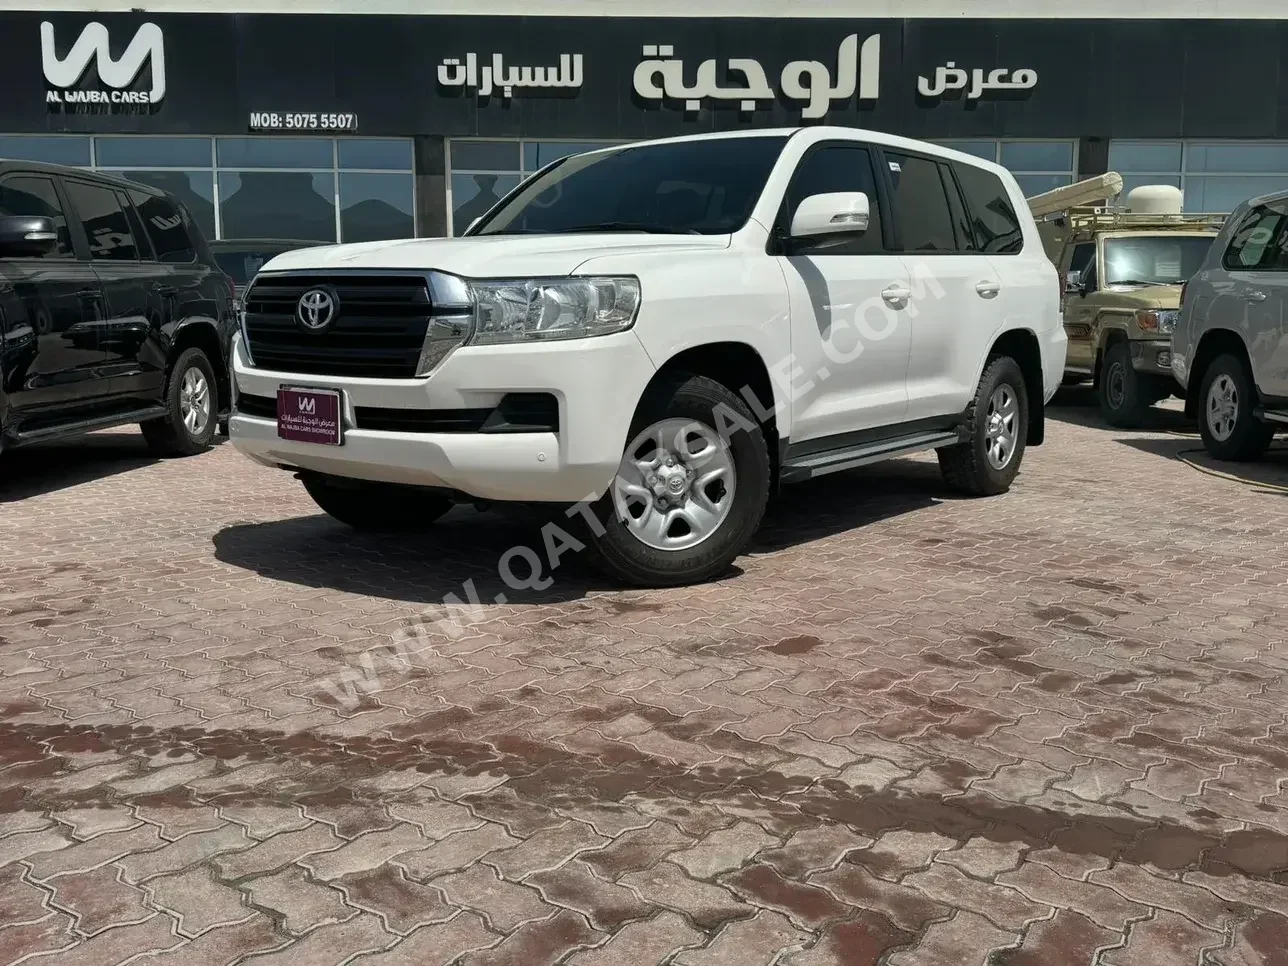 Toyota  Land Cruiser  G  2021  Automatic  117,000 Km  6 Cylinder  Four Wheel Drive (4WD)  SUV  White